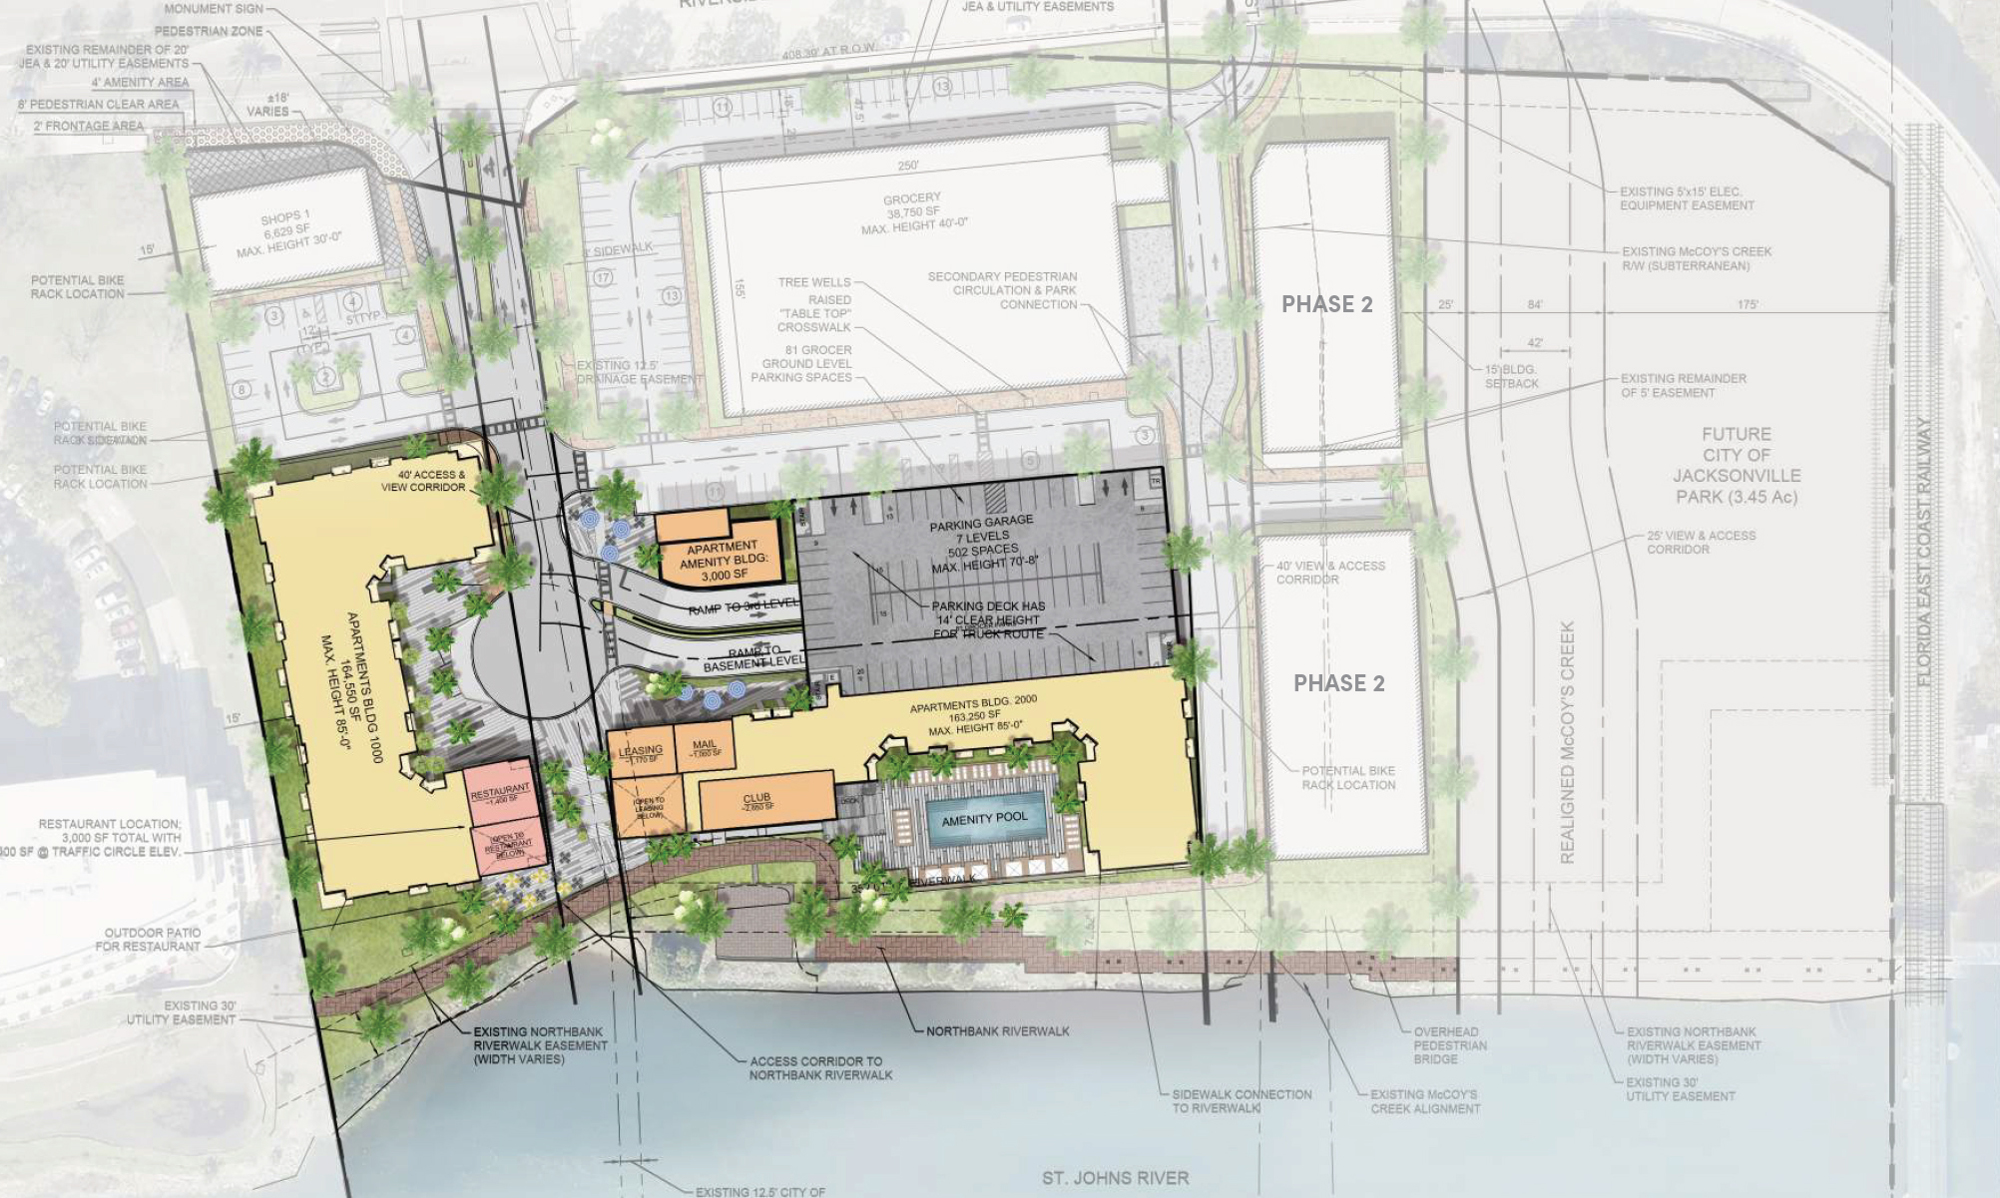 The site plan for the One Riverside Project